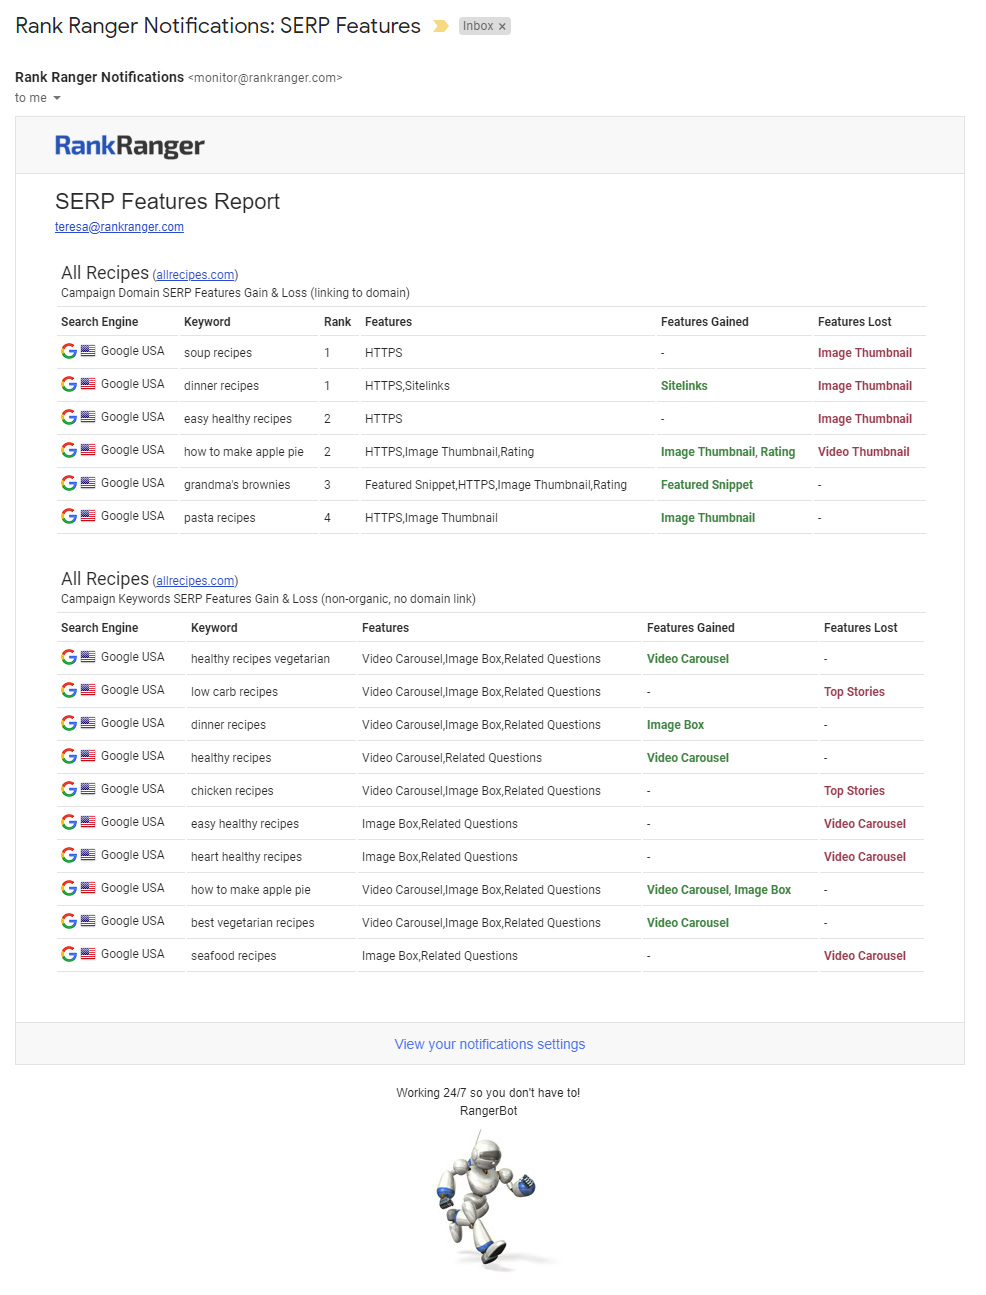 SERP Features Monitor report